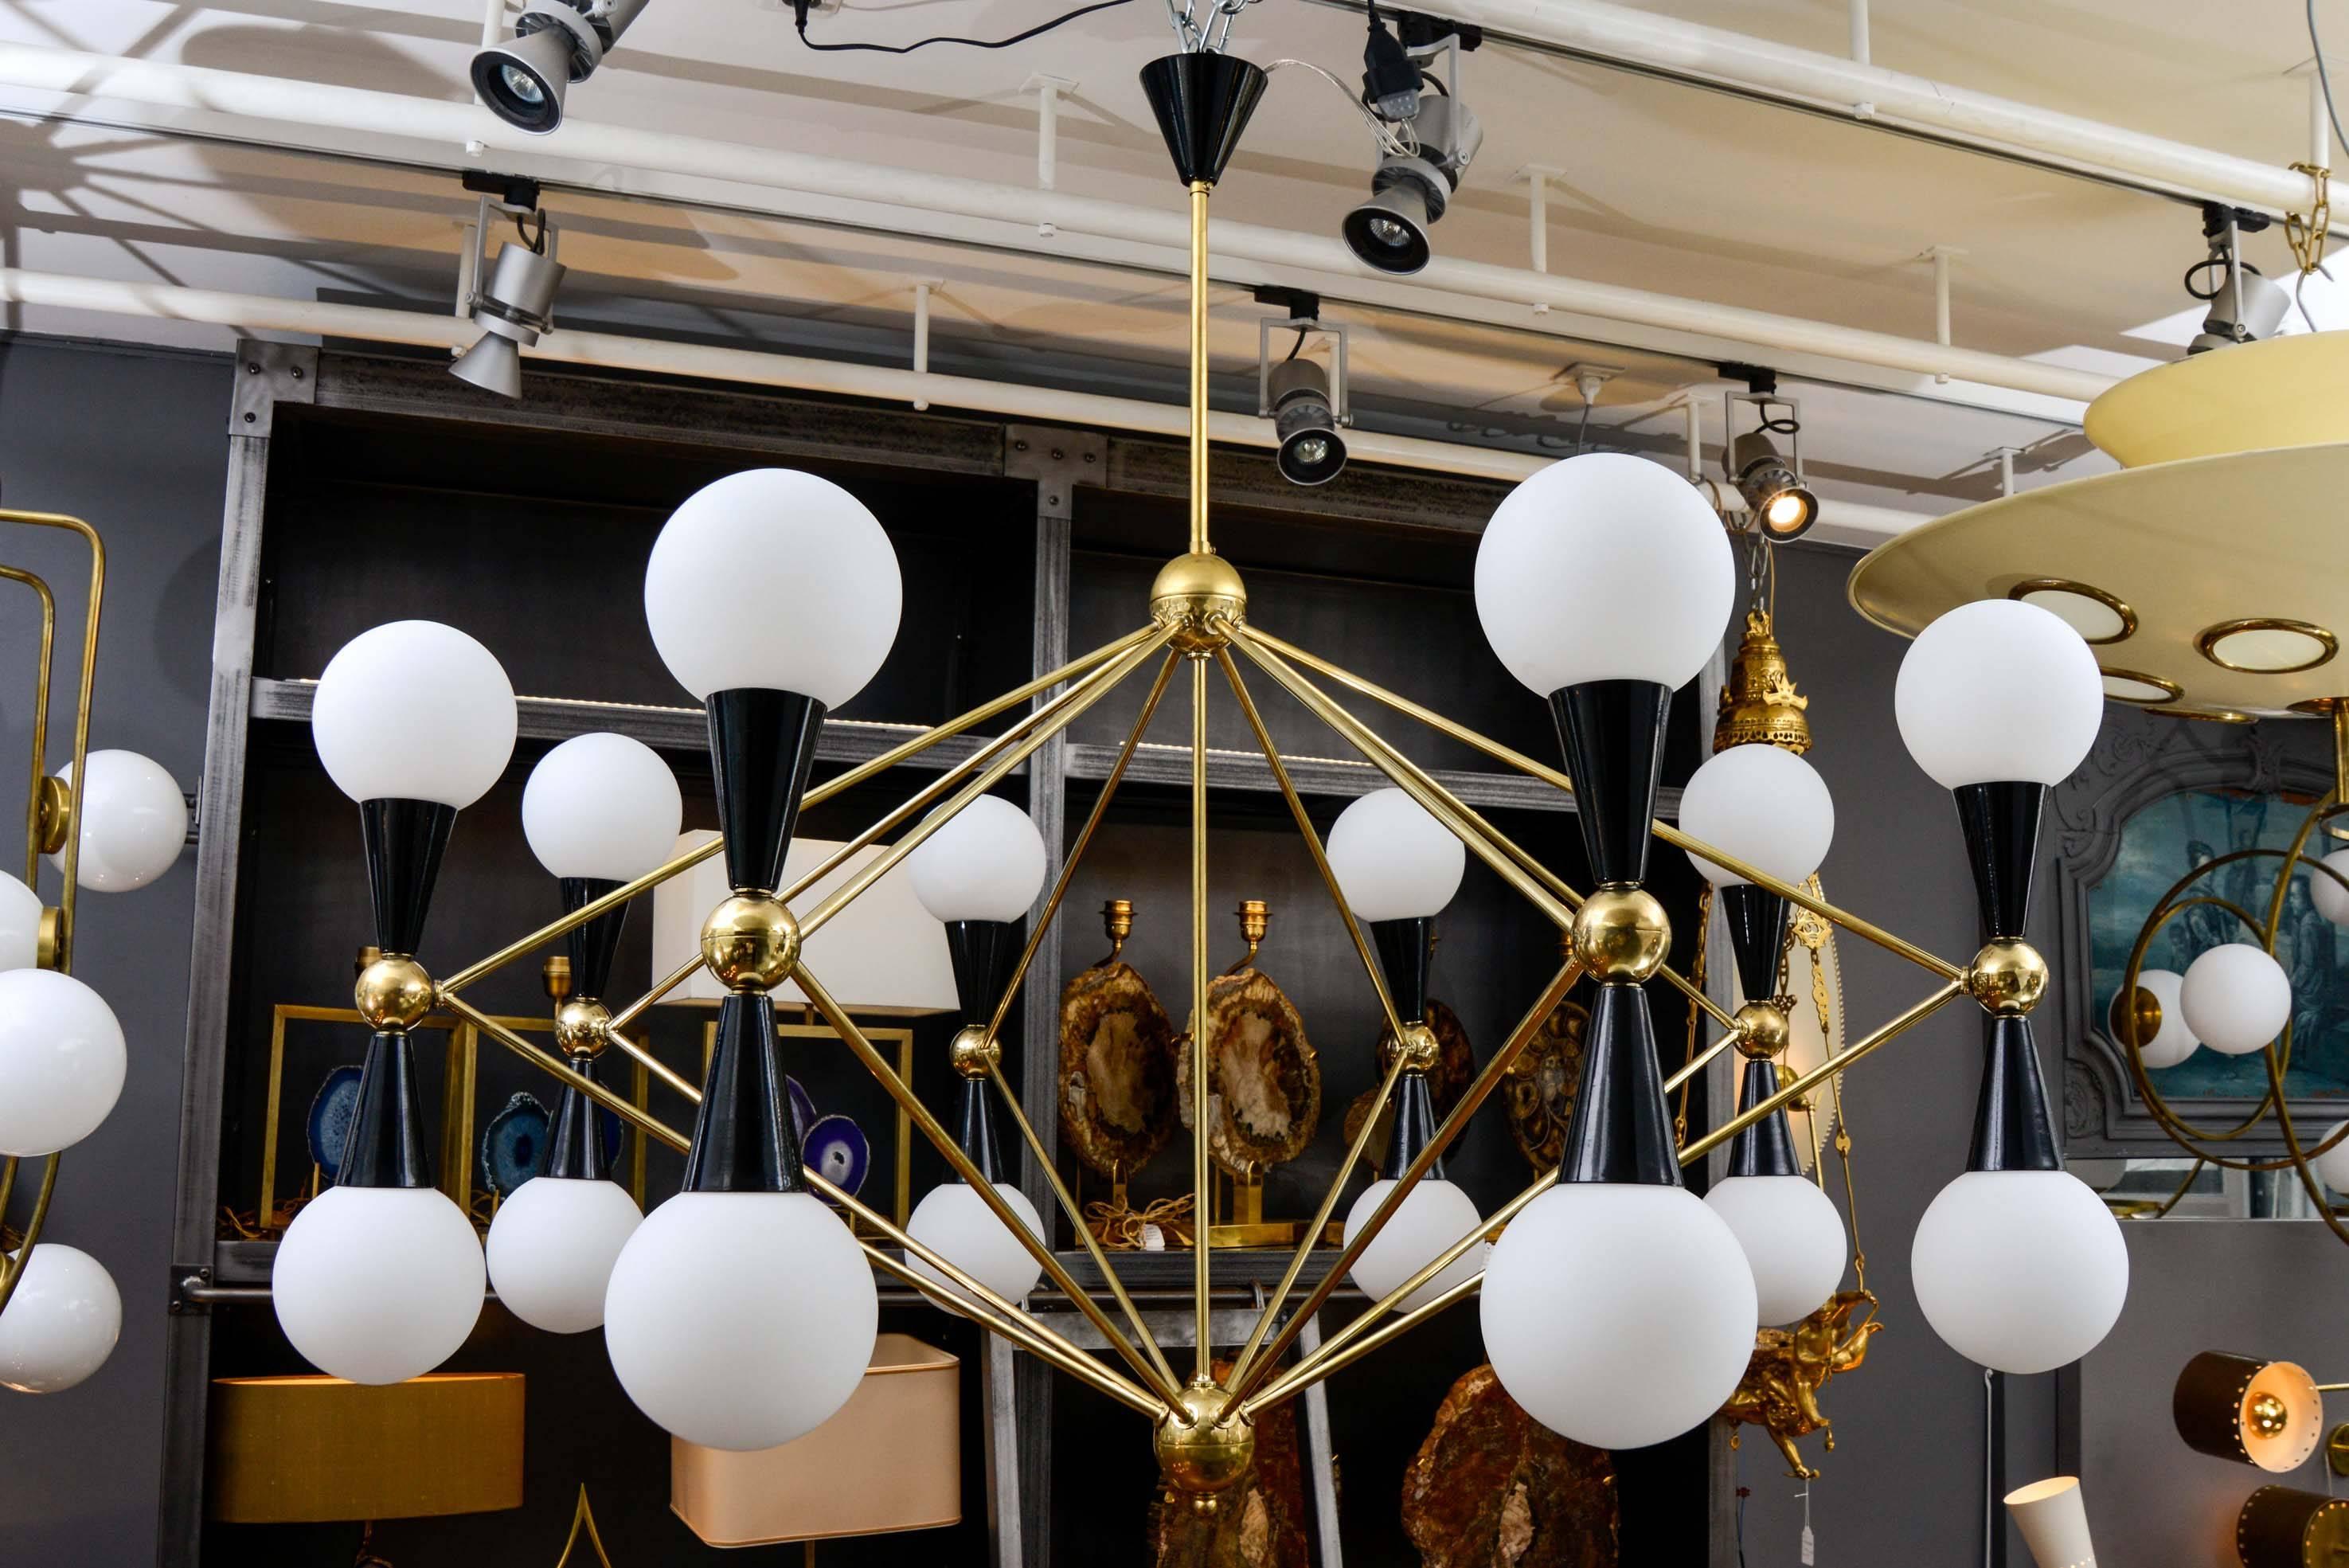 Pair of large brass chandeliers with black enameled metal cones and opaline glass globes holding the lights.